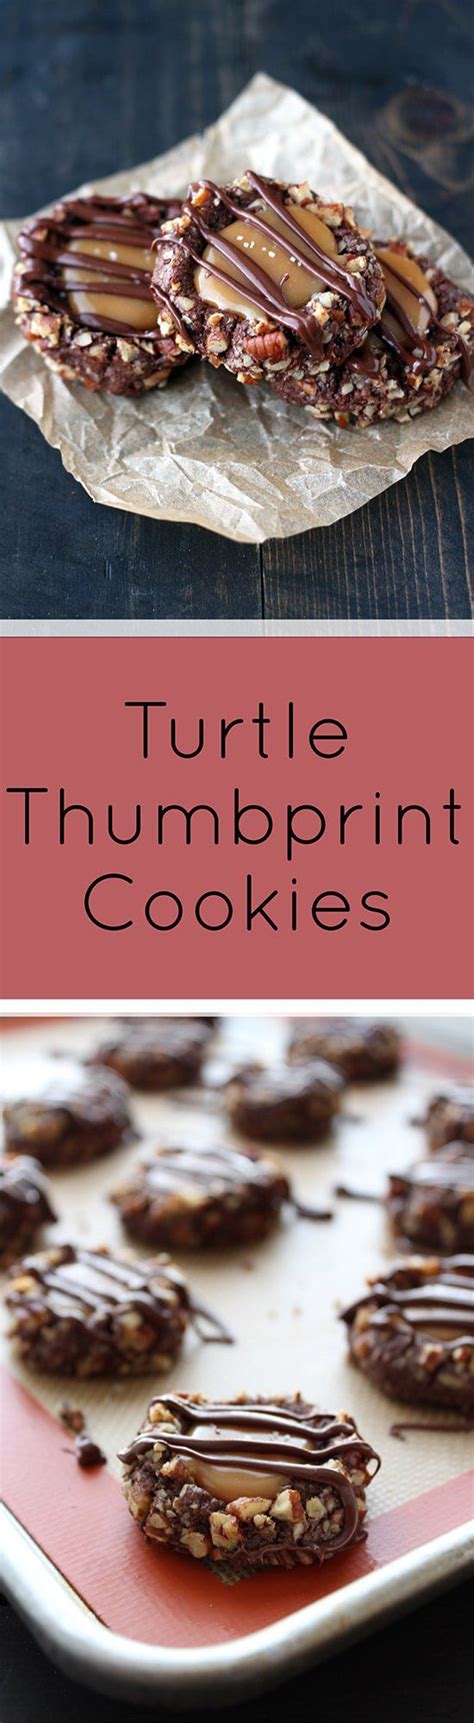 Turtle Thumbprint Cookies Are Mouthwatering With A Cocoa Cookie Rolled